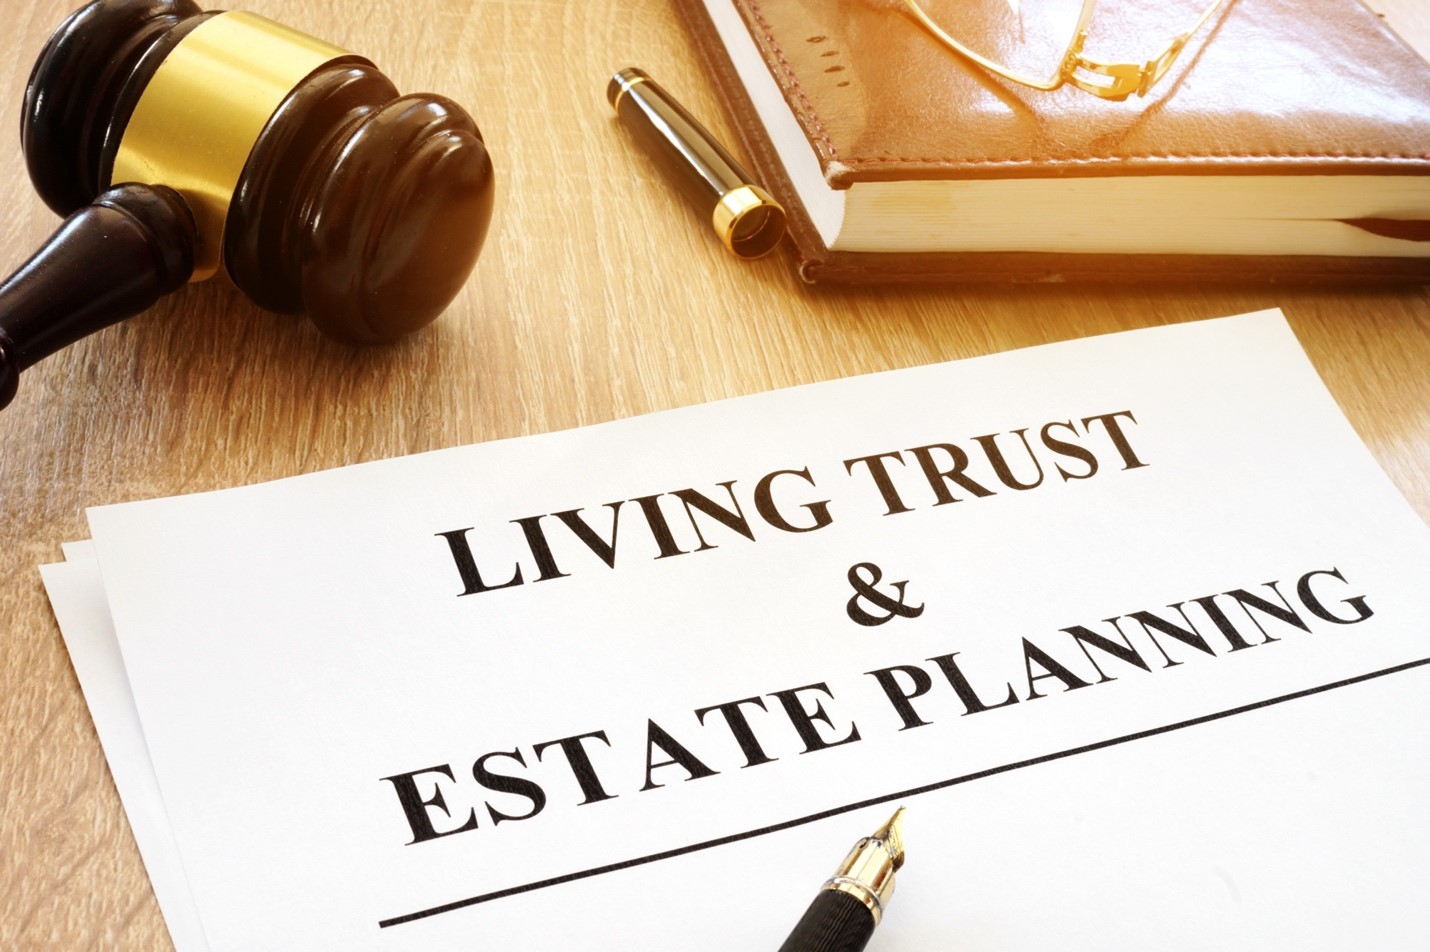 The Jennifer V. Abelaj Law Firm can help create revocable living trusts that provide clear instructions about your wishes.